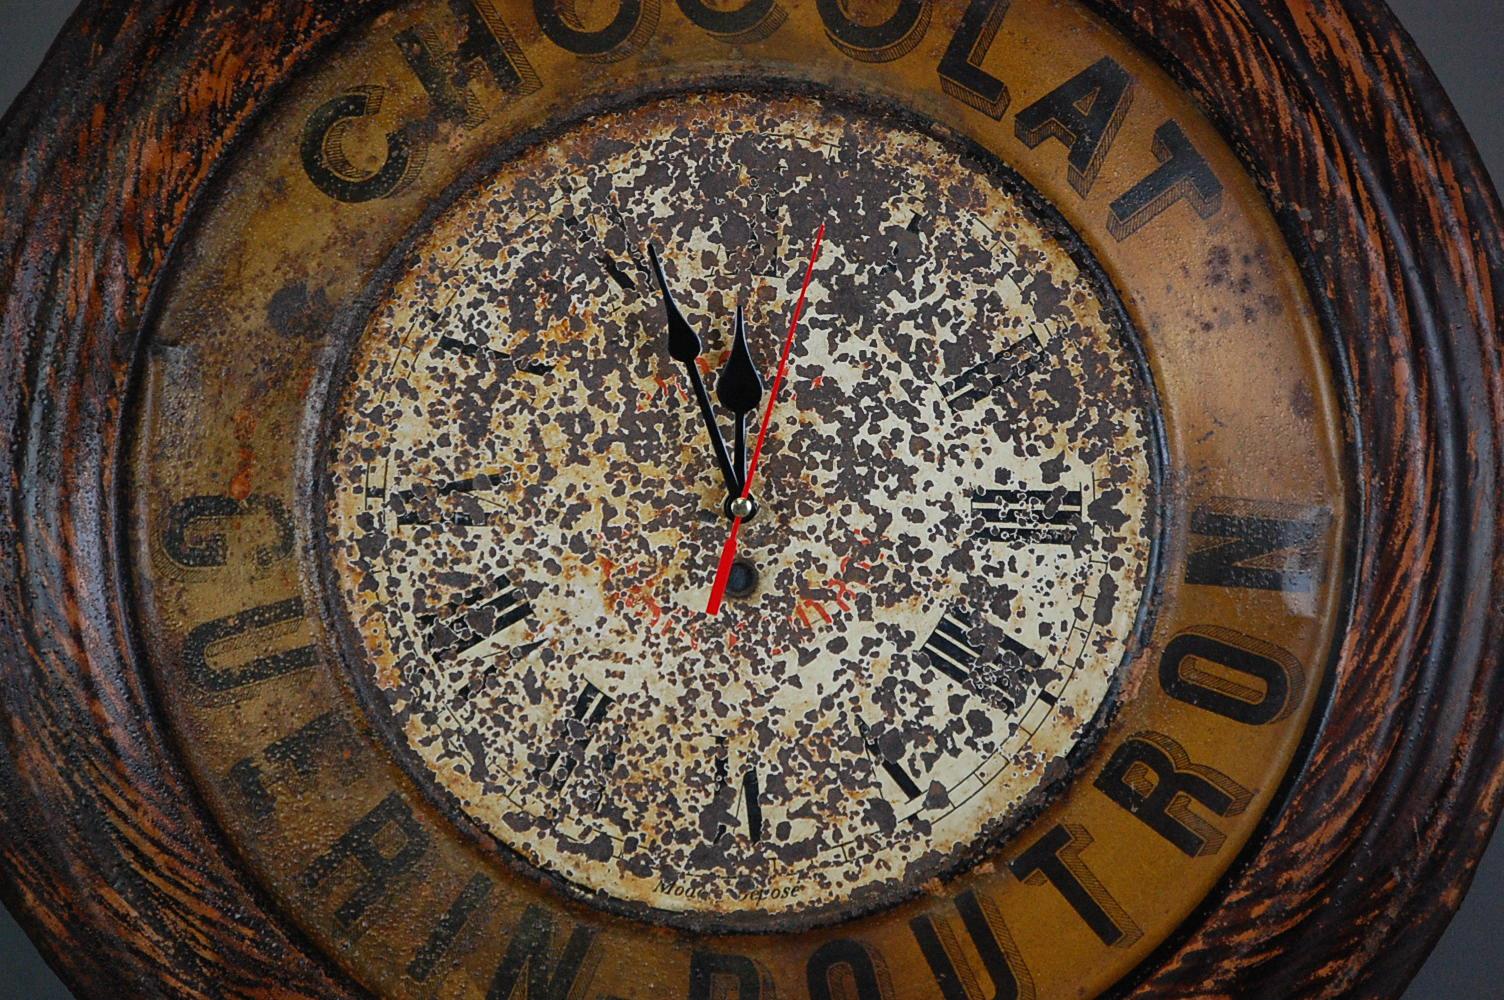 Original Chocolat Guerin Boutron advertising clock, wonderful patination, leaving the clock face highly distressed. Updated with a modern quartz movement.